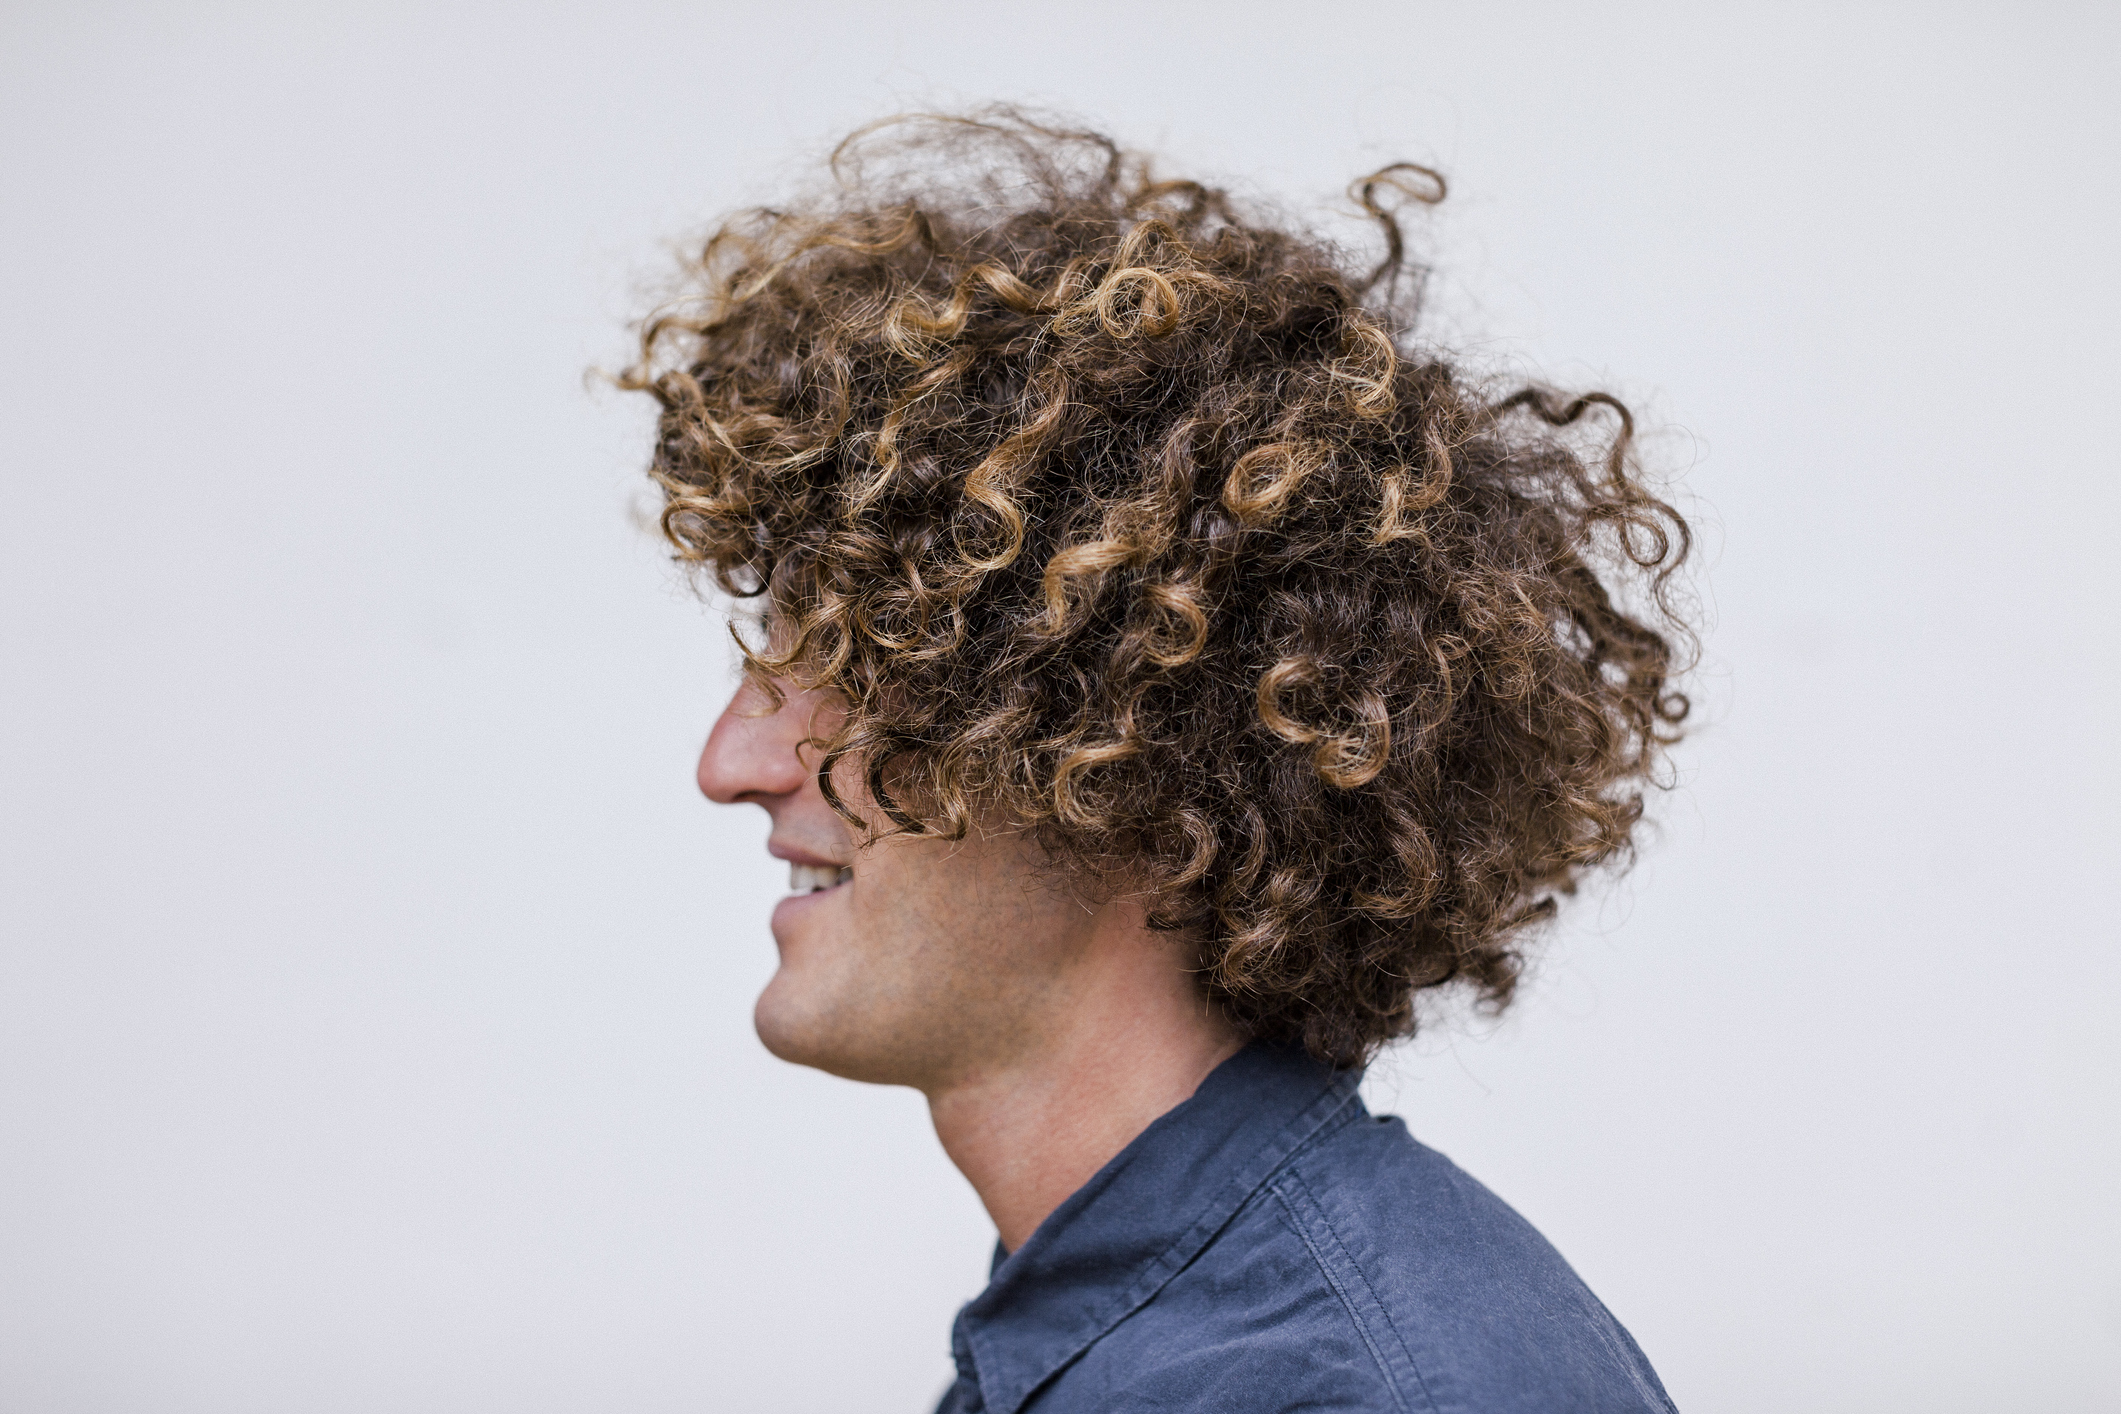 11 Hottest Men's Curly Hairstyles that Attract Women - The Manual